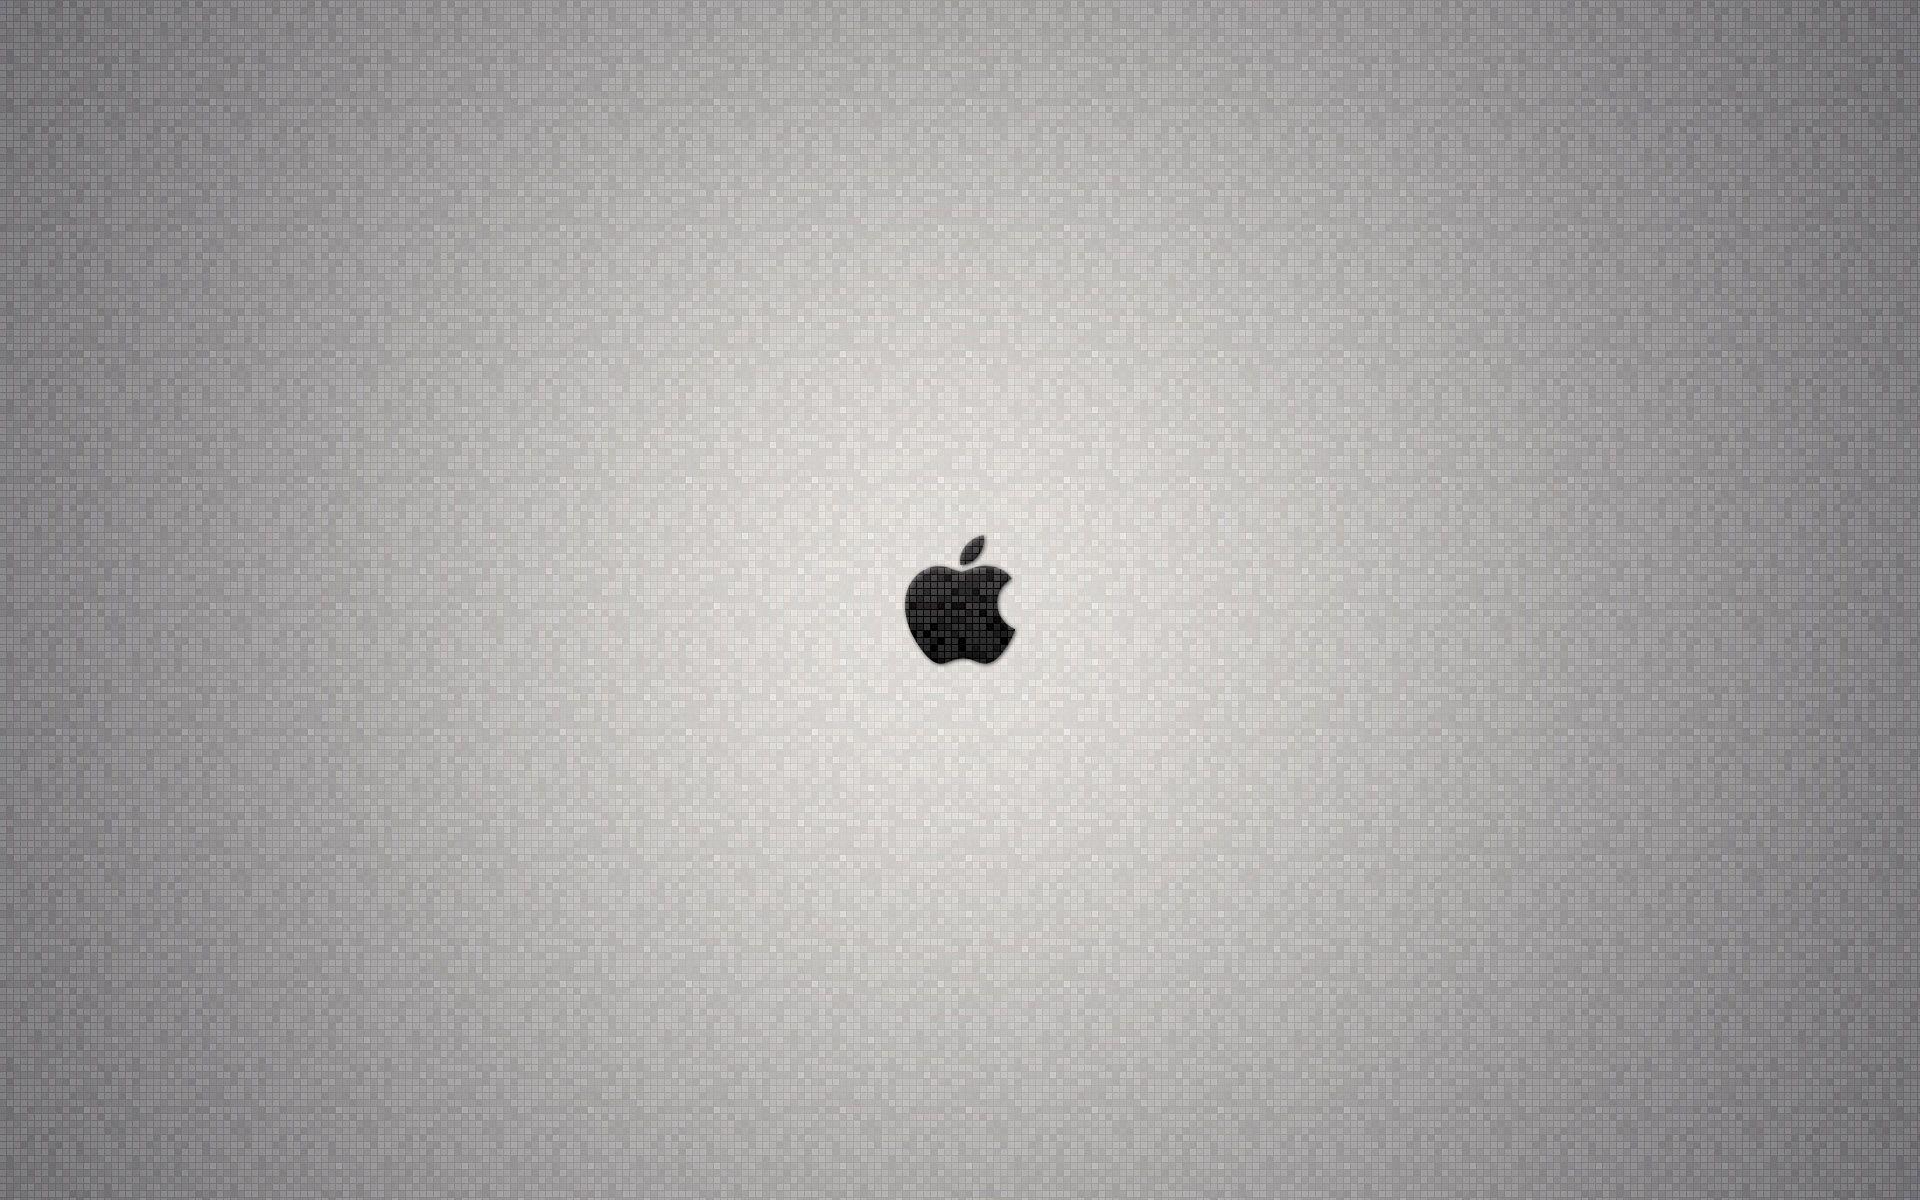 Small Apple Logo - 18 Apple Icon Small Images - Small Apple Logo, Small Apple Logo and ...